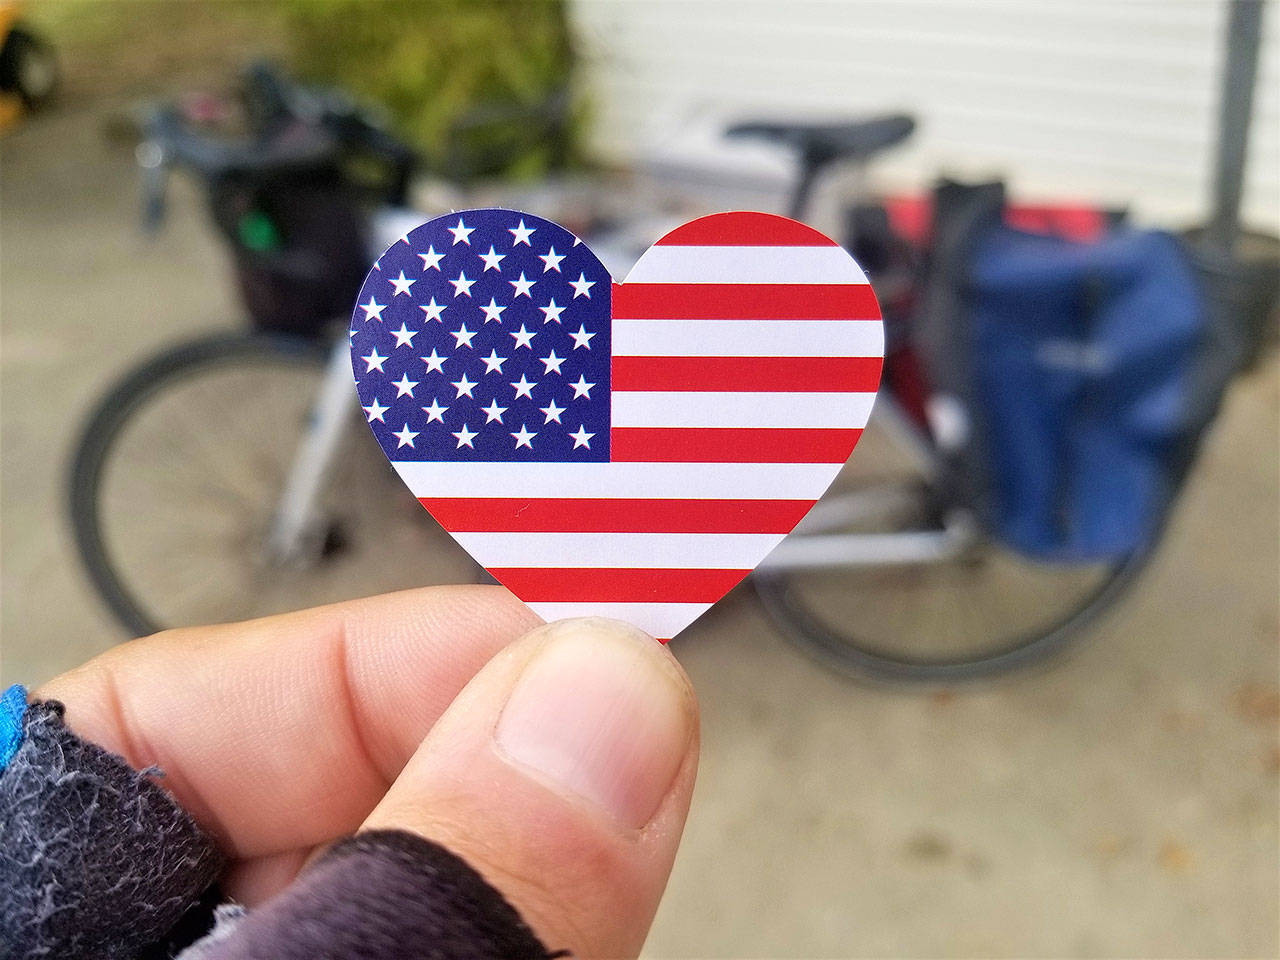 Along his 4,233 mile journey, Gillock handed out hundreds of American hearts to everyone he met in order to spread his message of unity and balance between the two dominant political parties. Photo courtesy of Kirk Gillock.